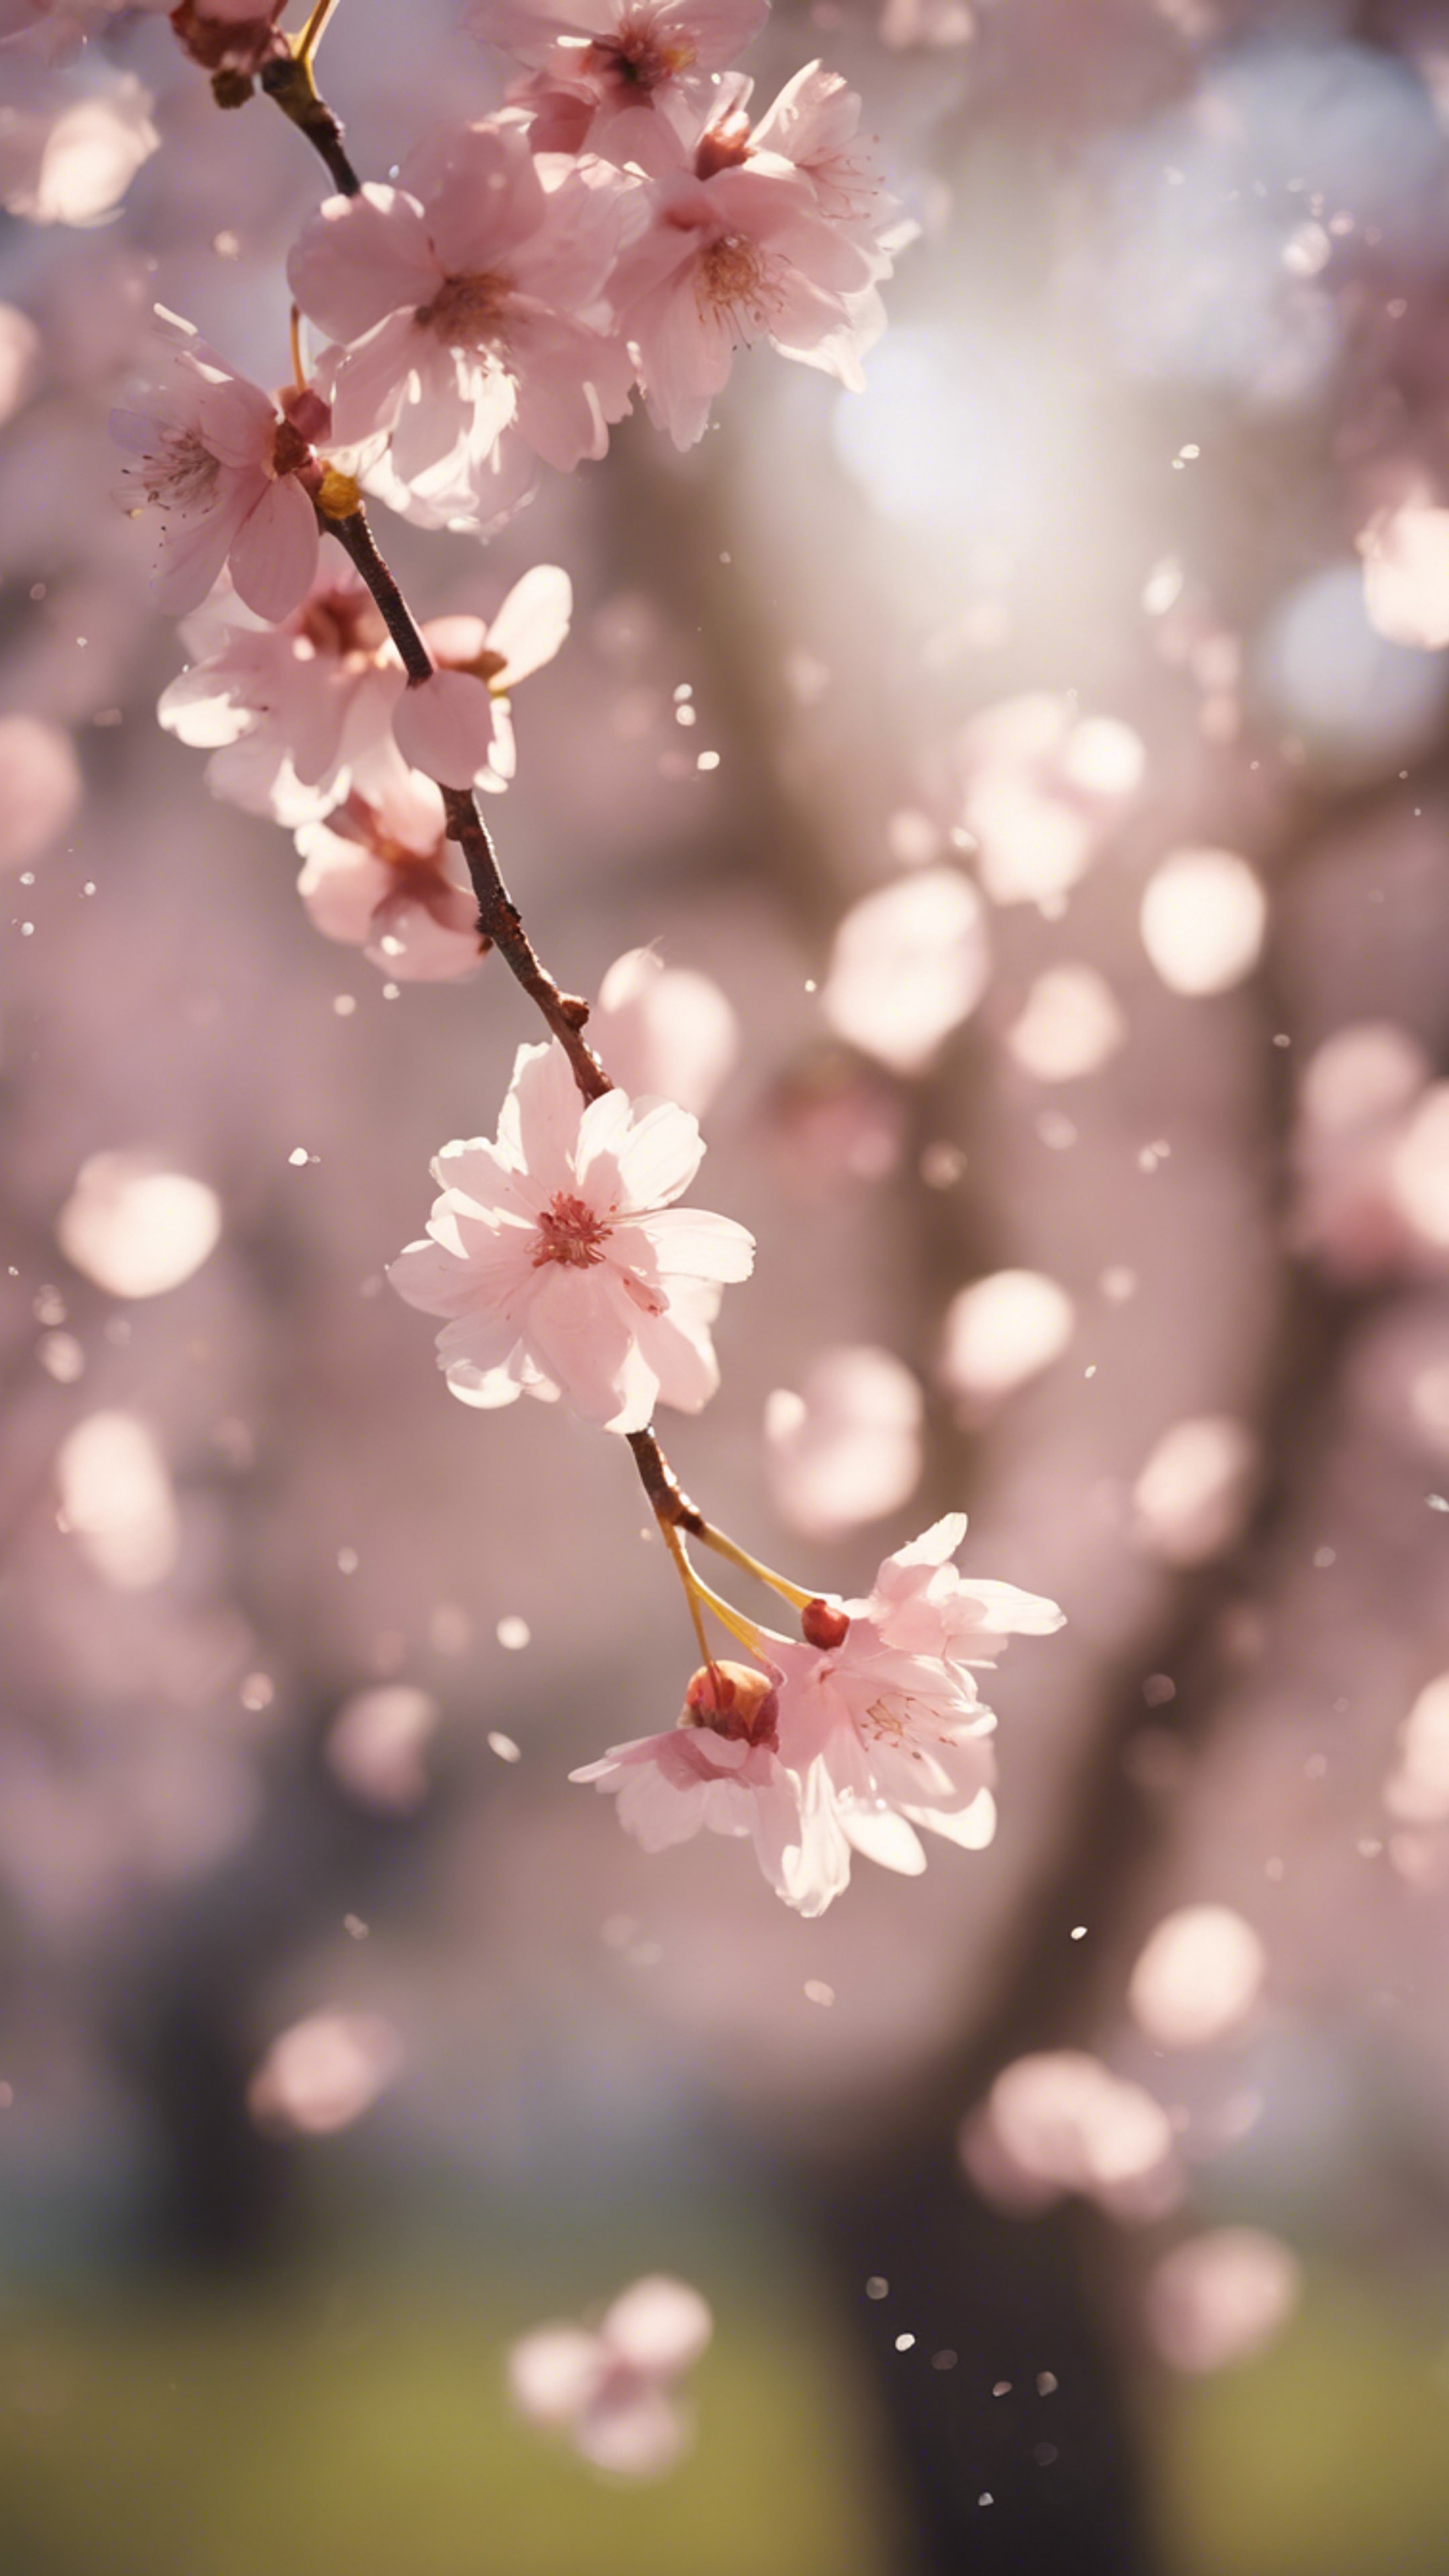 Tiny, light pink cherry blossom petals falling gently from a tree in the morning light. 墙纸[bcff163445454d48bfbe]